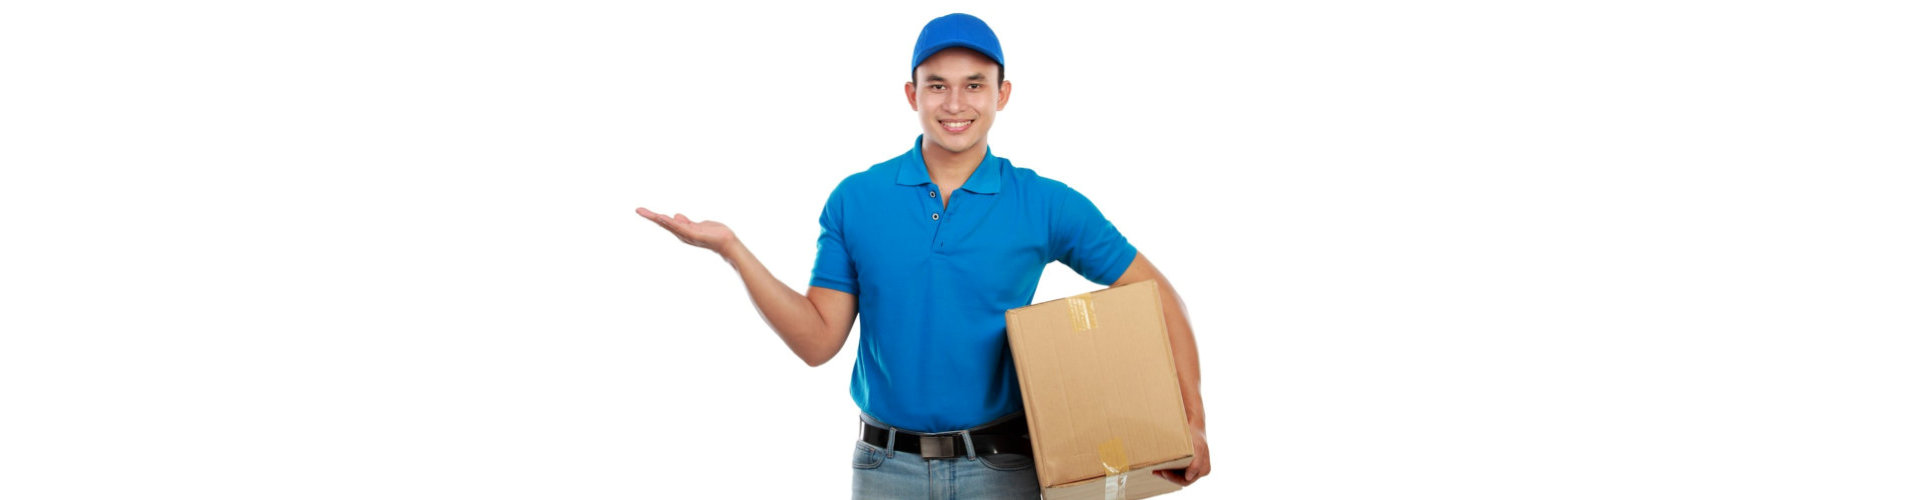 portrait of smiling delivery man with package on white background